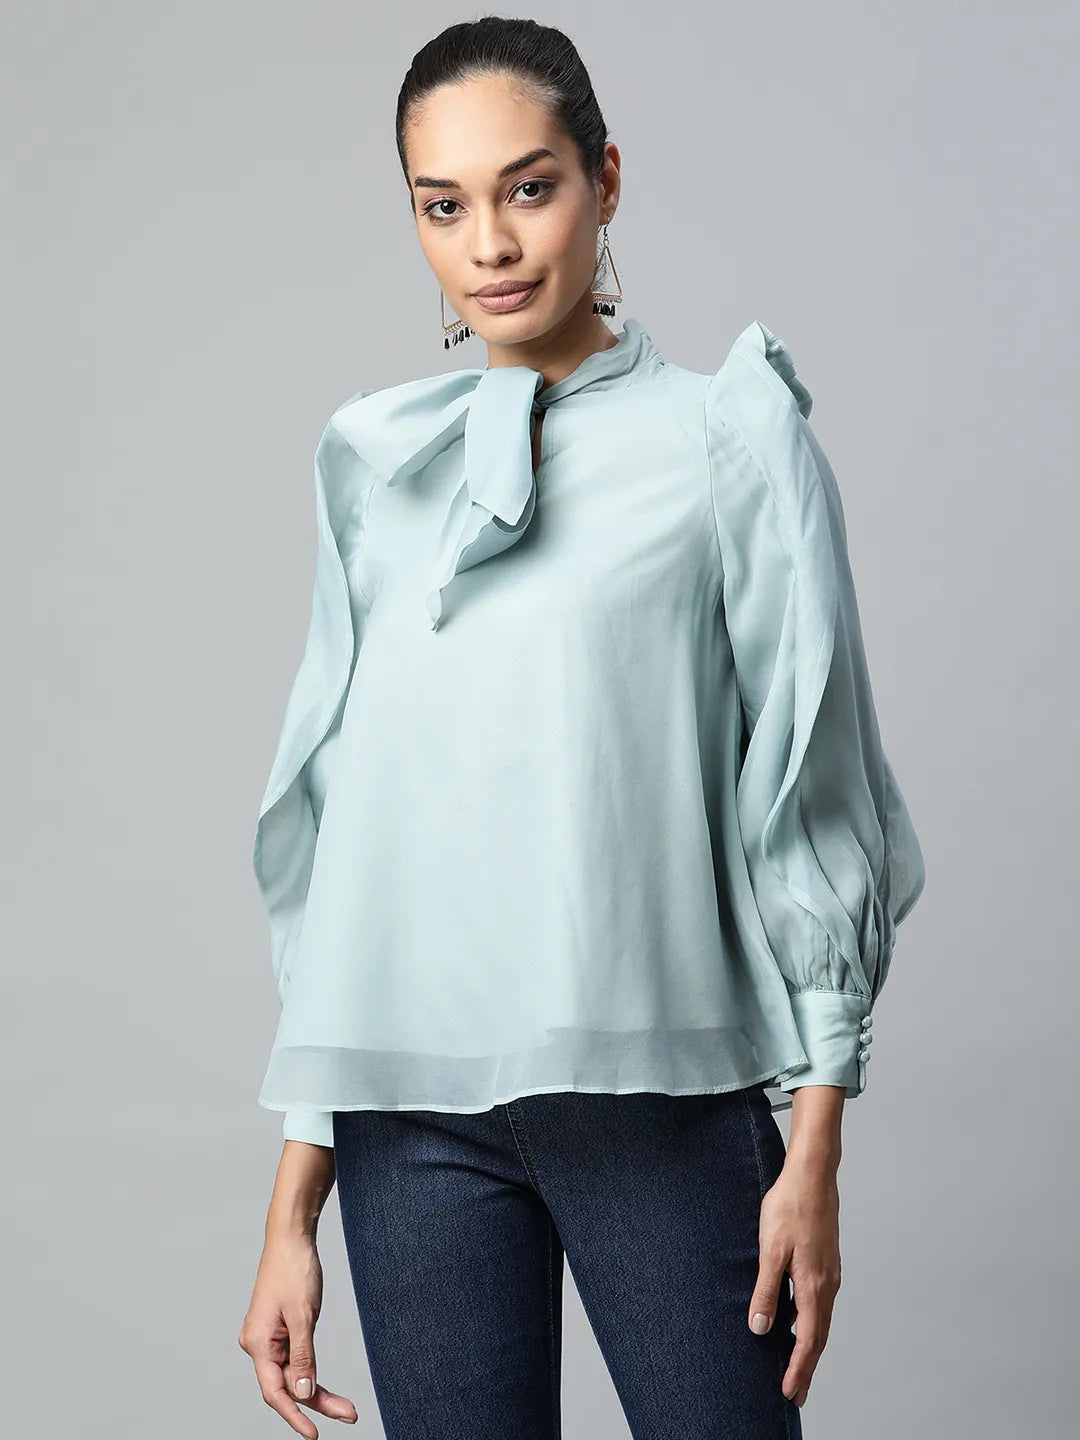 Women Teal Tie-Up Neck Ruffle Sleeve Blouse Top